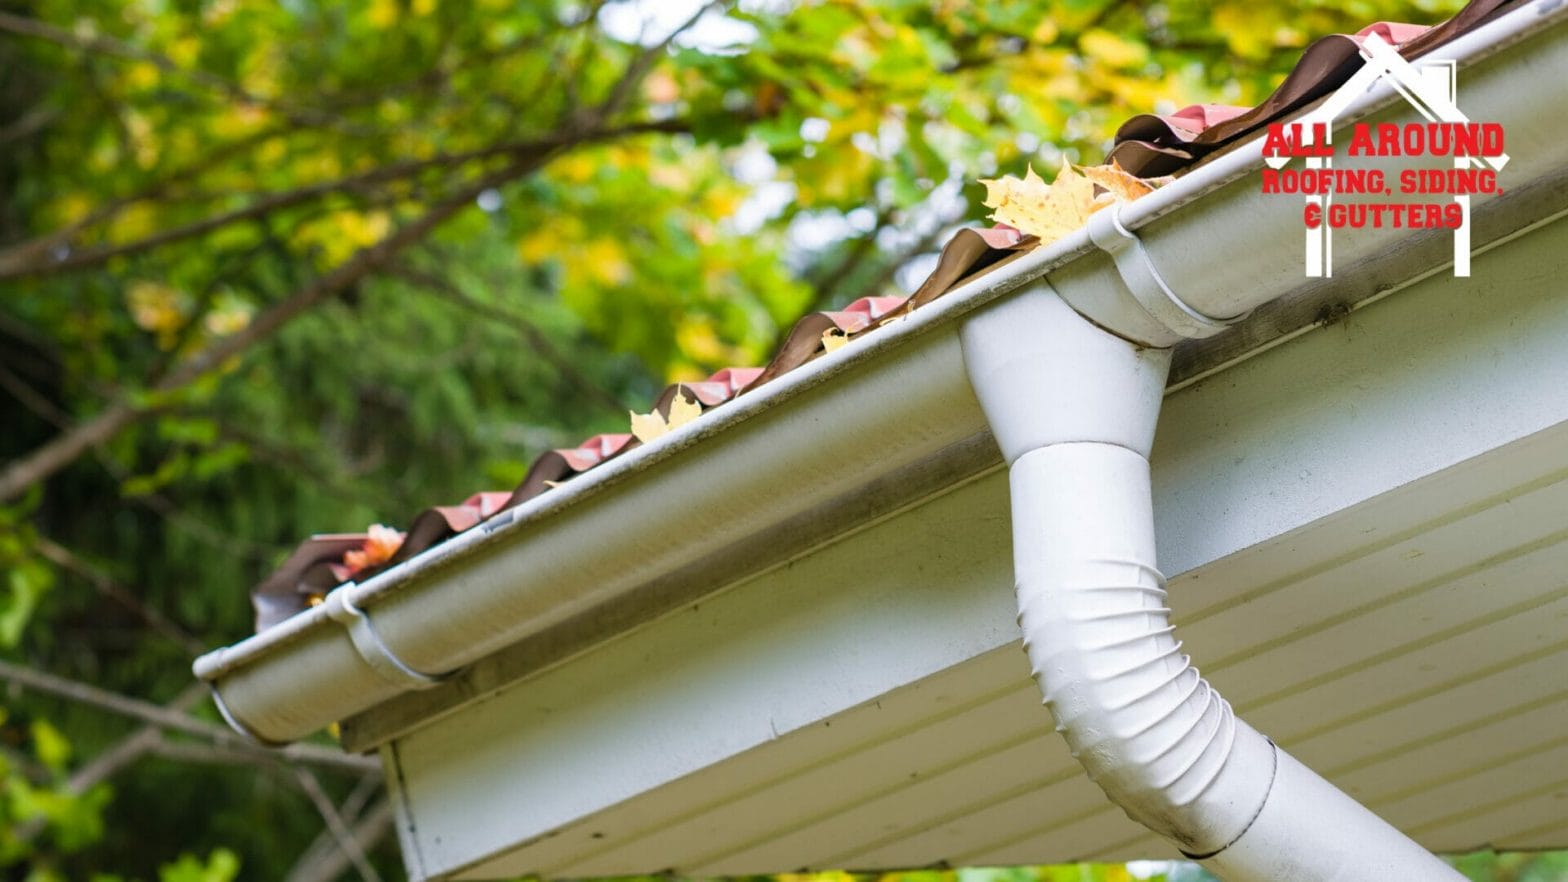 Half Round Gutter Pros and Cons & The 3 Must Know Facts